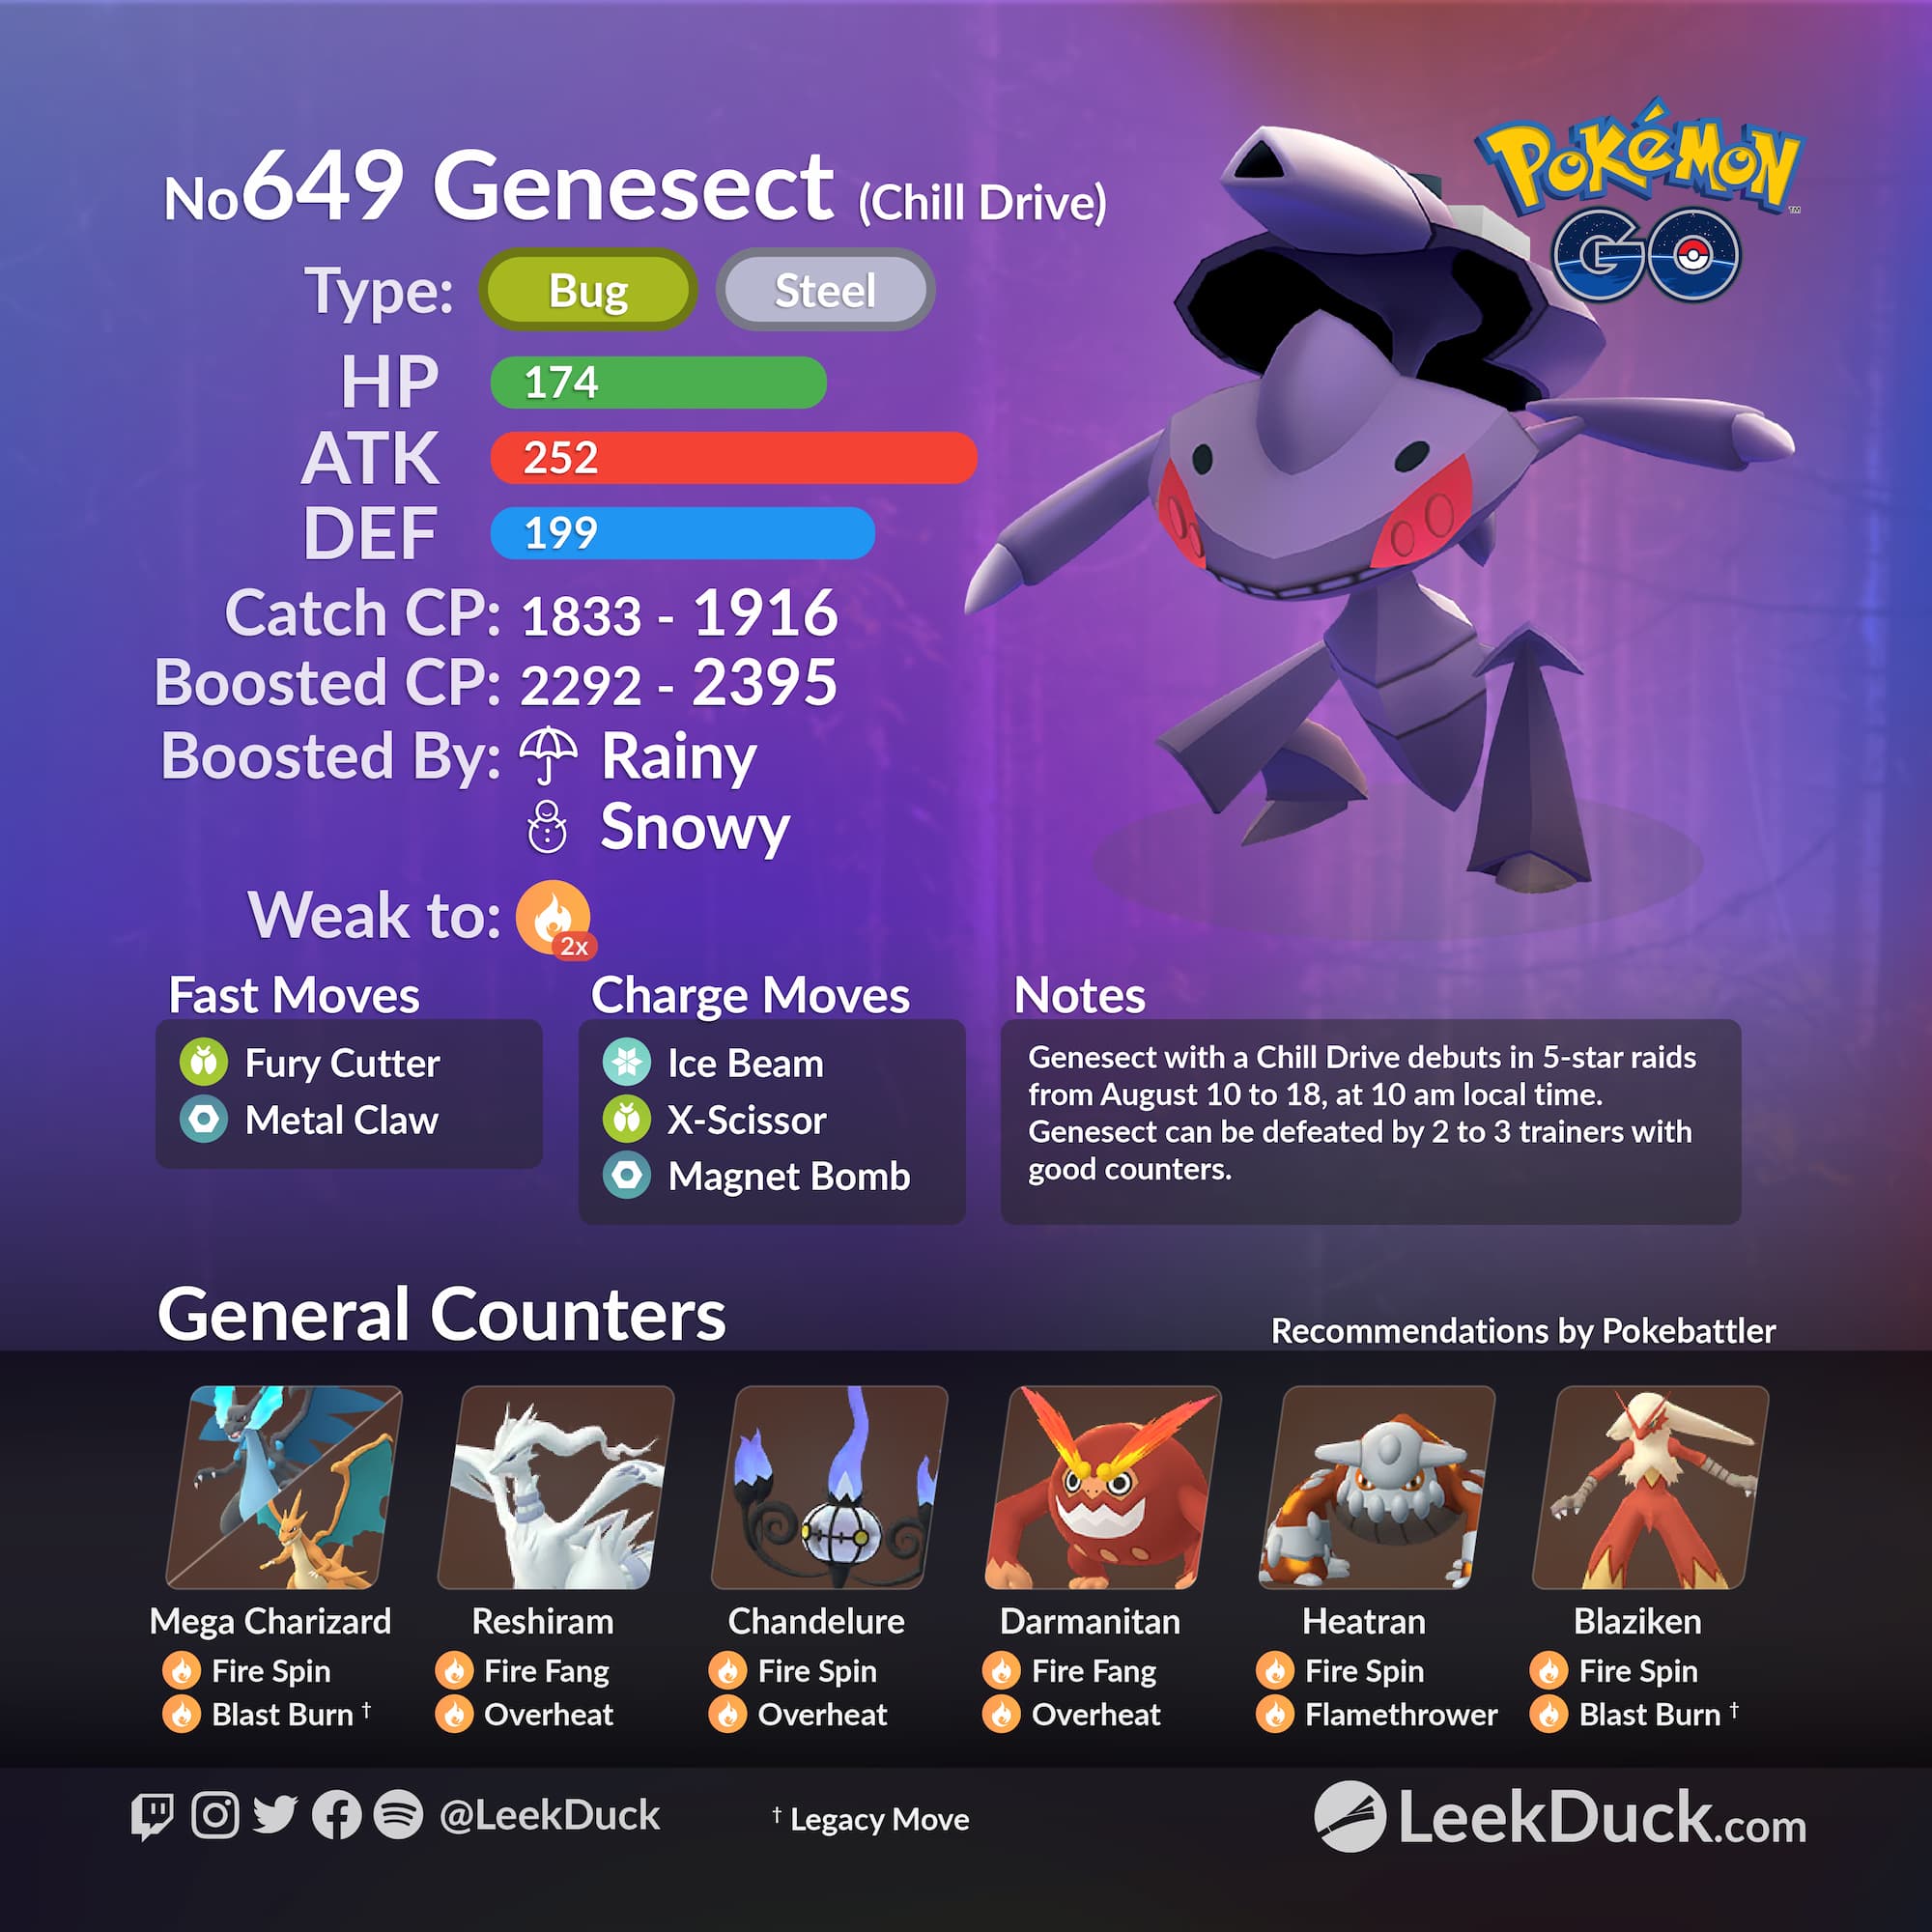 Pokémon GO Changes Genesect Quests So They Can All Be Done Alone